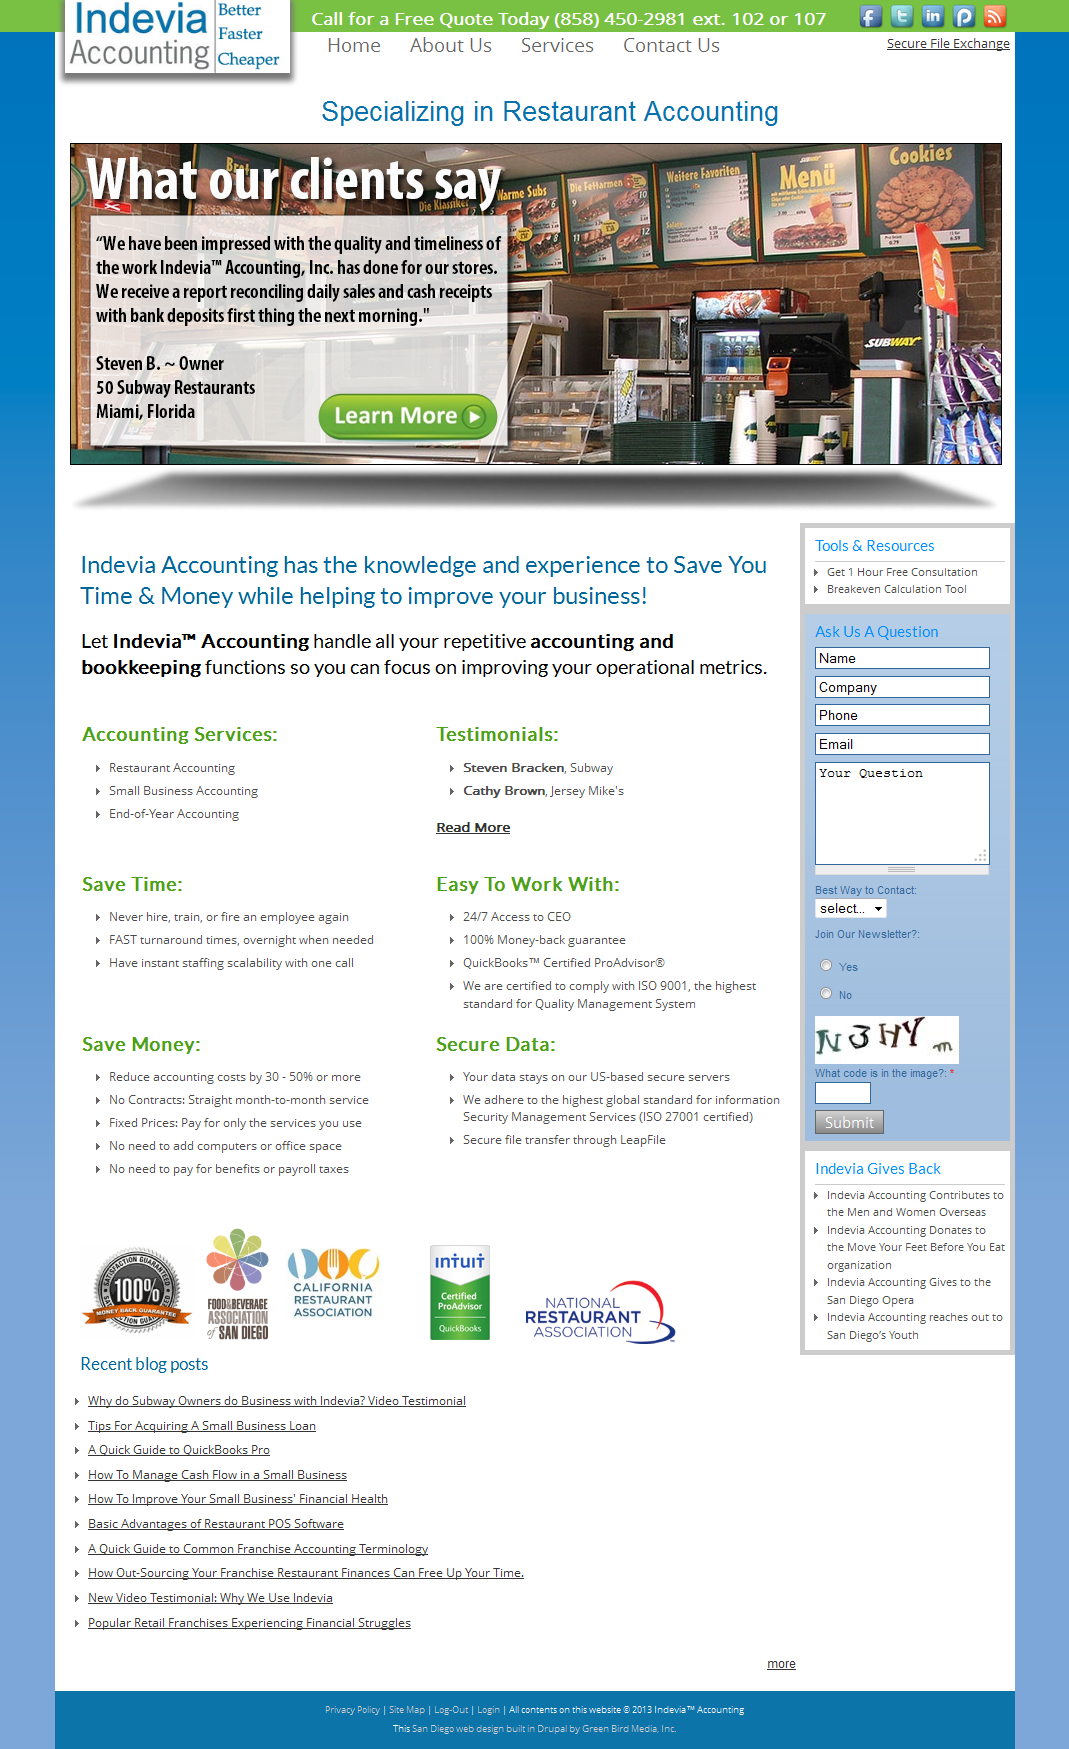 Indevia Accounting's new Drupal Website Redesign